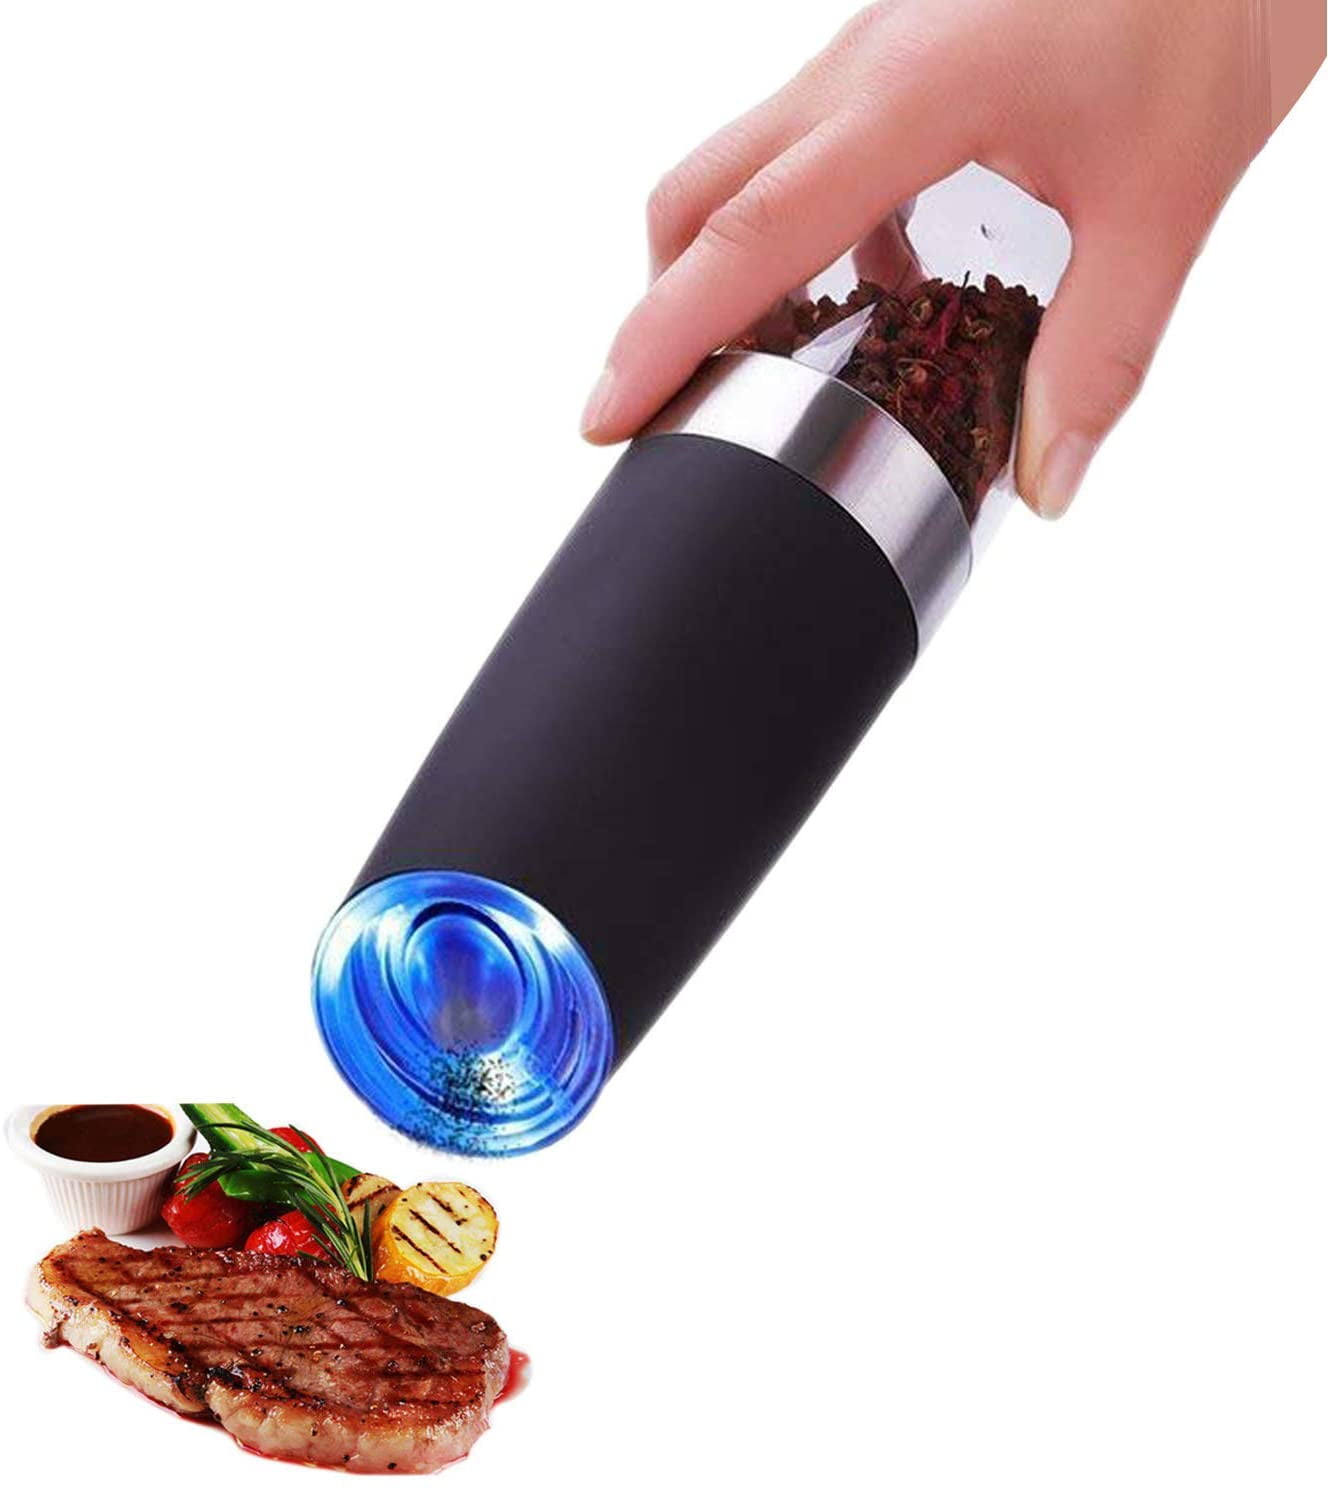 1pc LED Light Electric Automatic Salt and Pepper Grinder Gravity